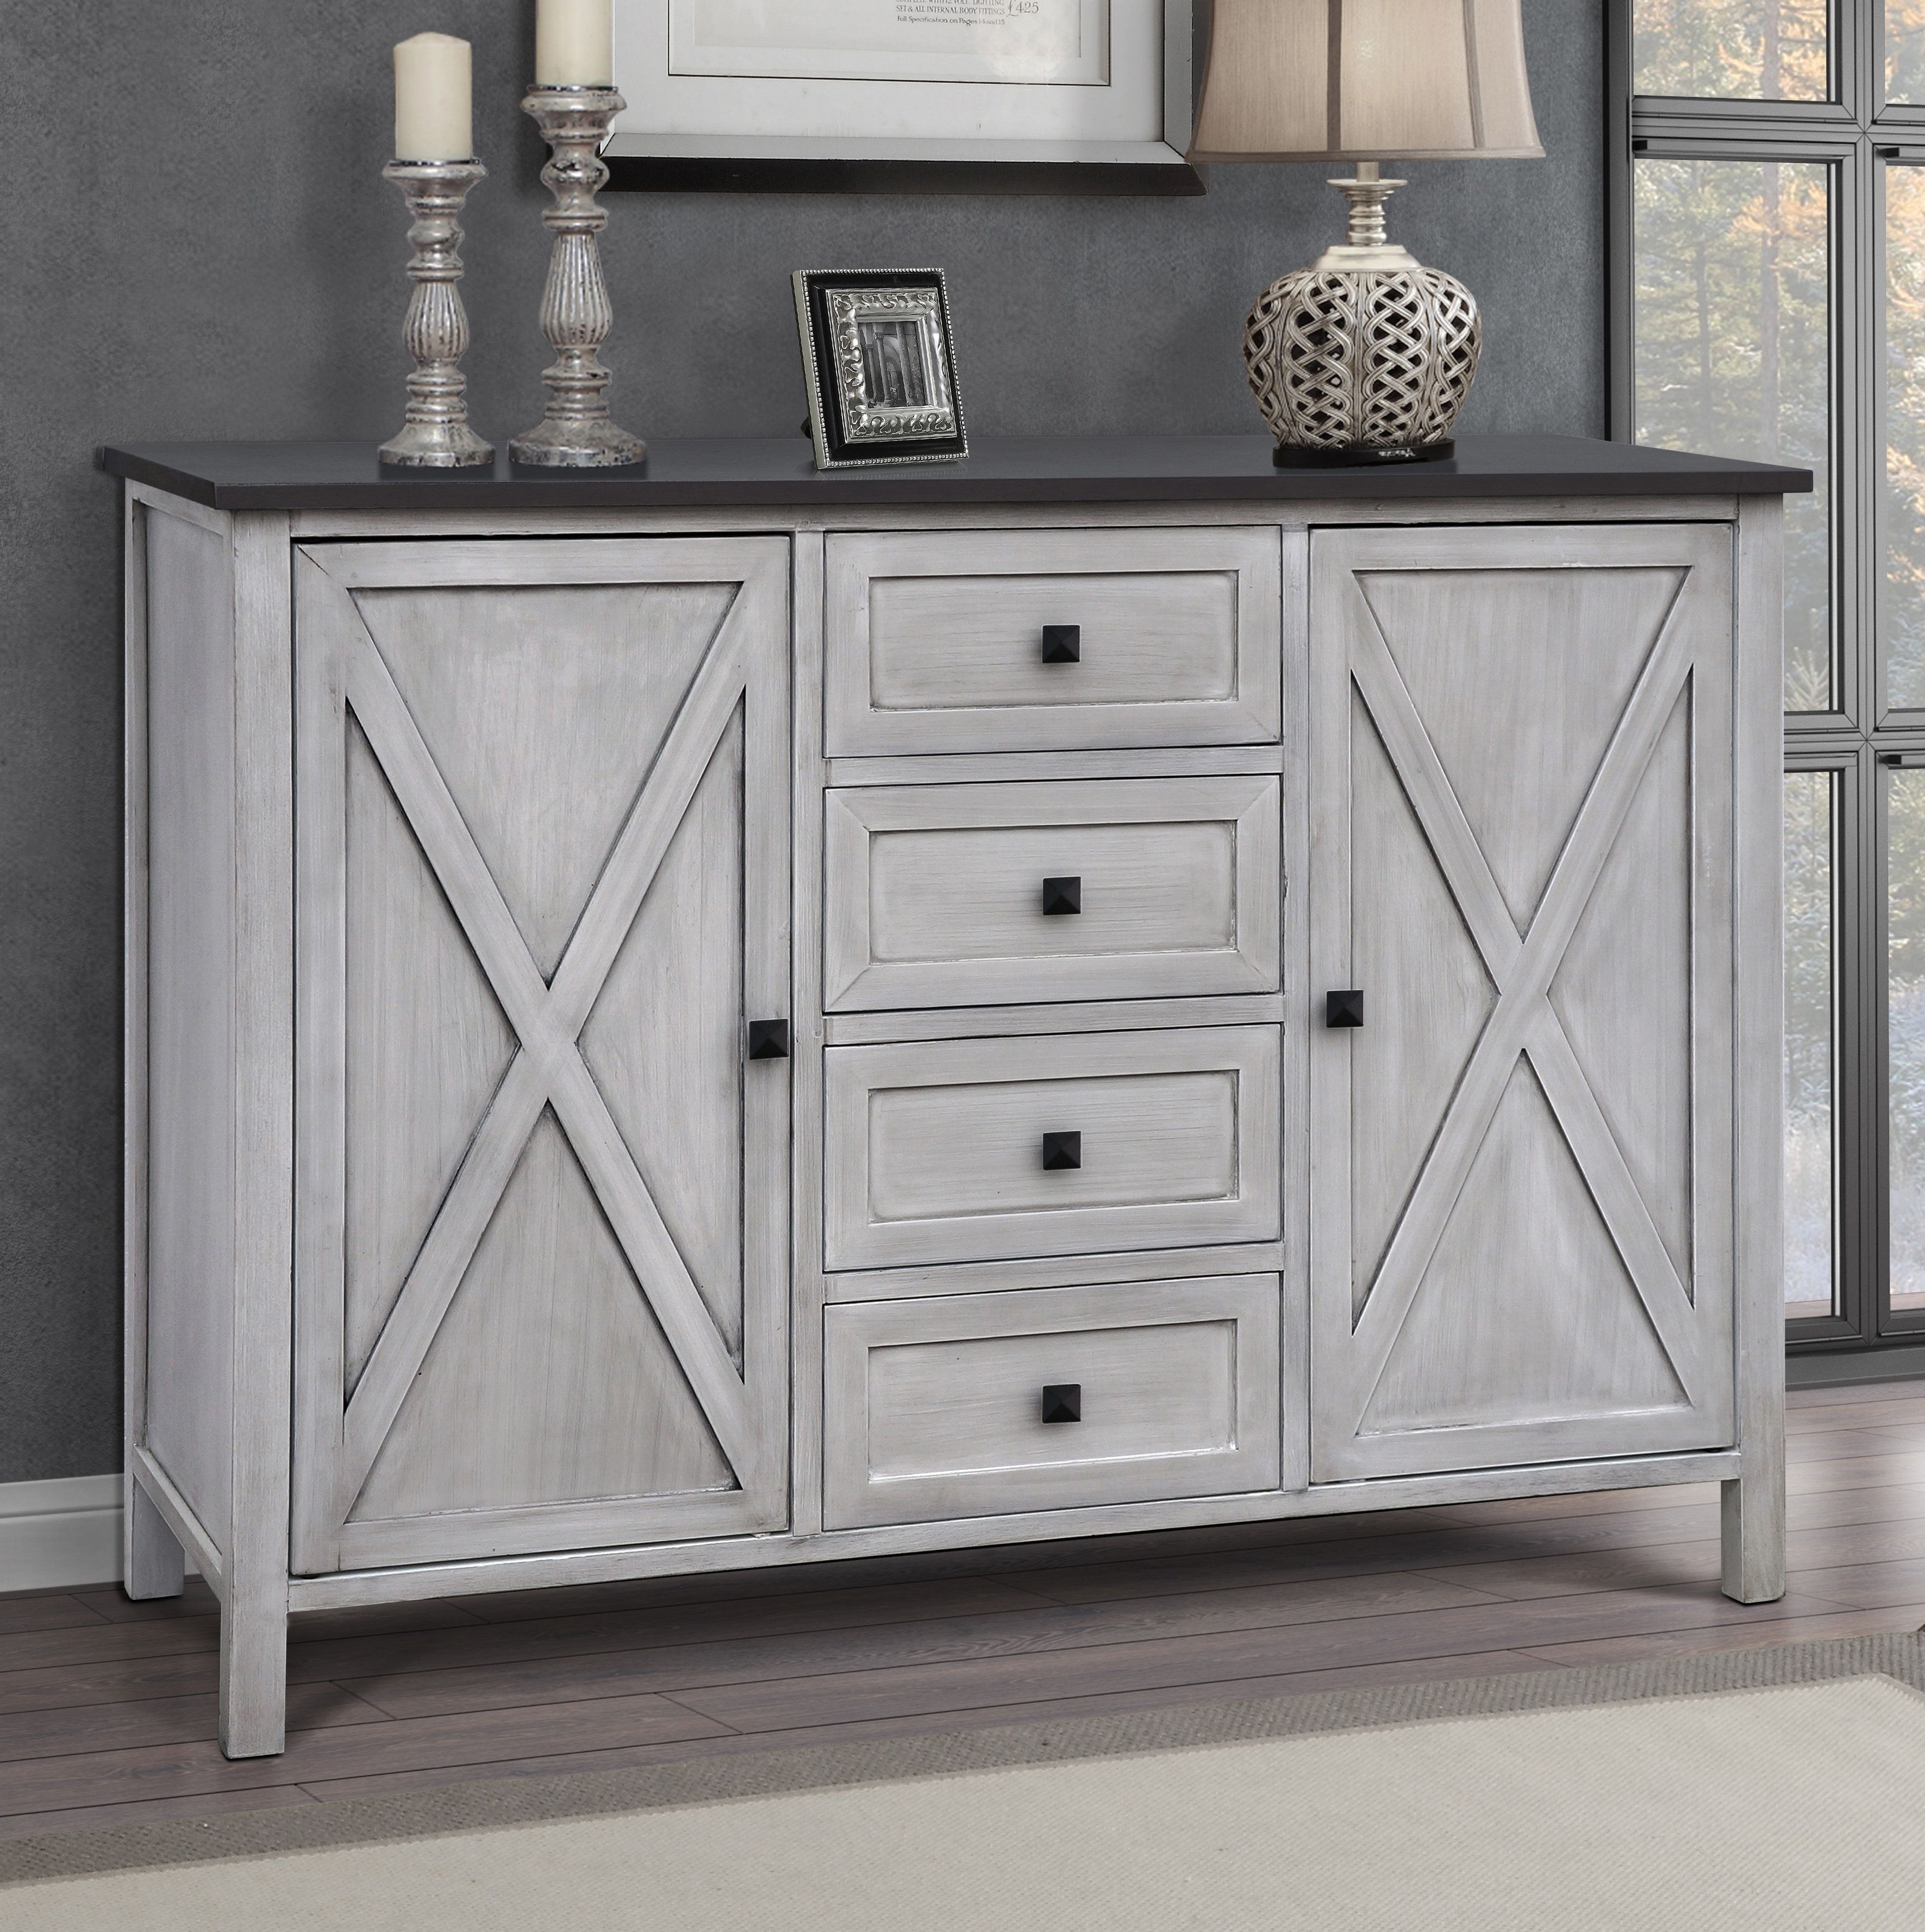 Lamb Farmhouse 4 Drawer 2 Door Accent Cabinet | Birch Lane Within 4 Door 4 Drawer Metal Inserts Sideboards (View 11 of 30)